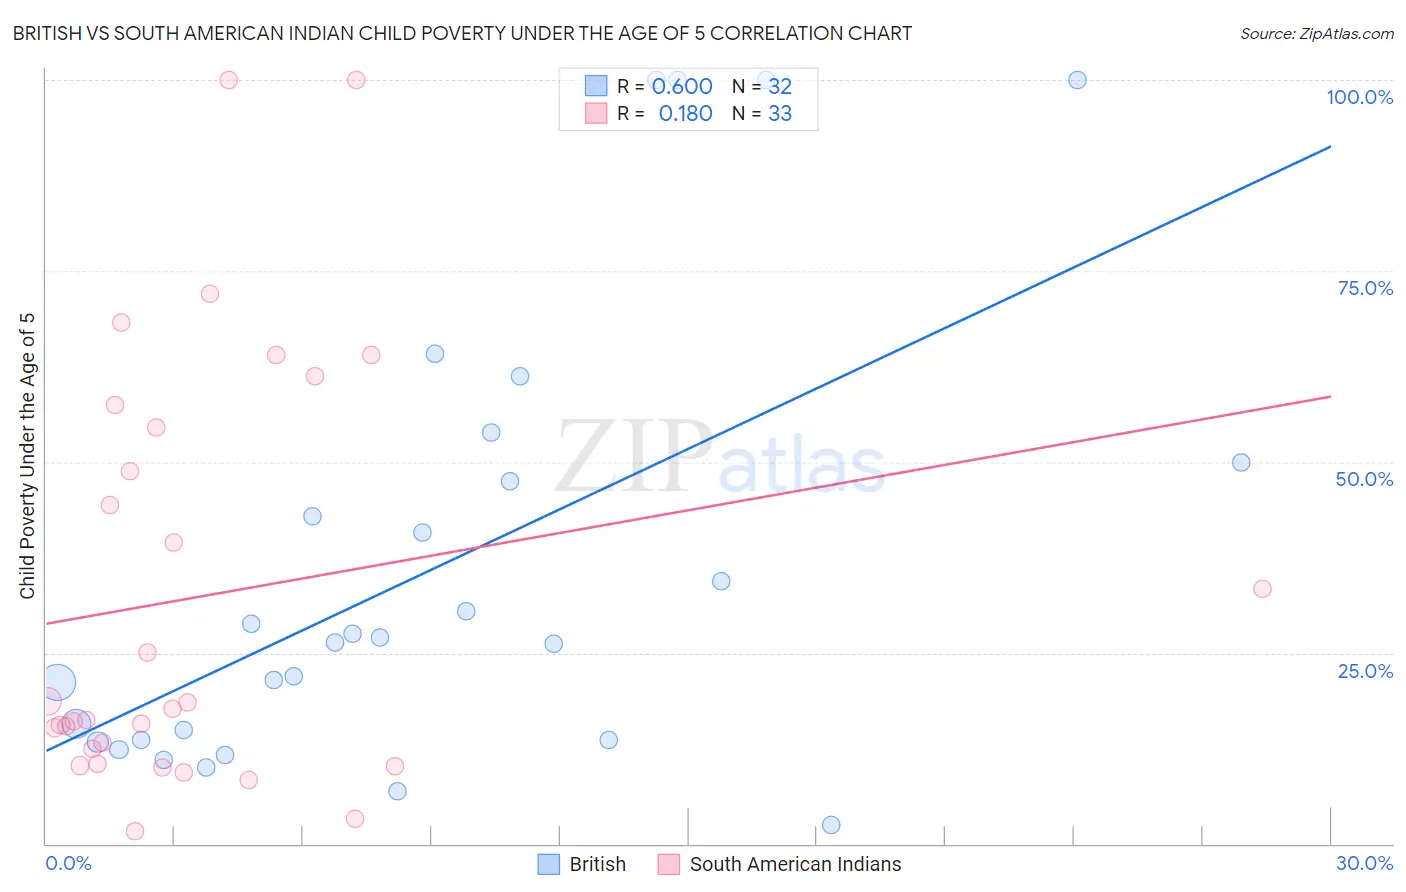 British vs South American Indian Child Poverty Under the Age of 5